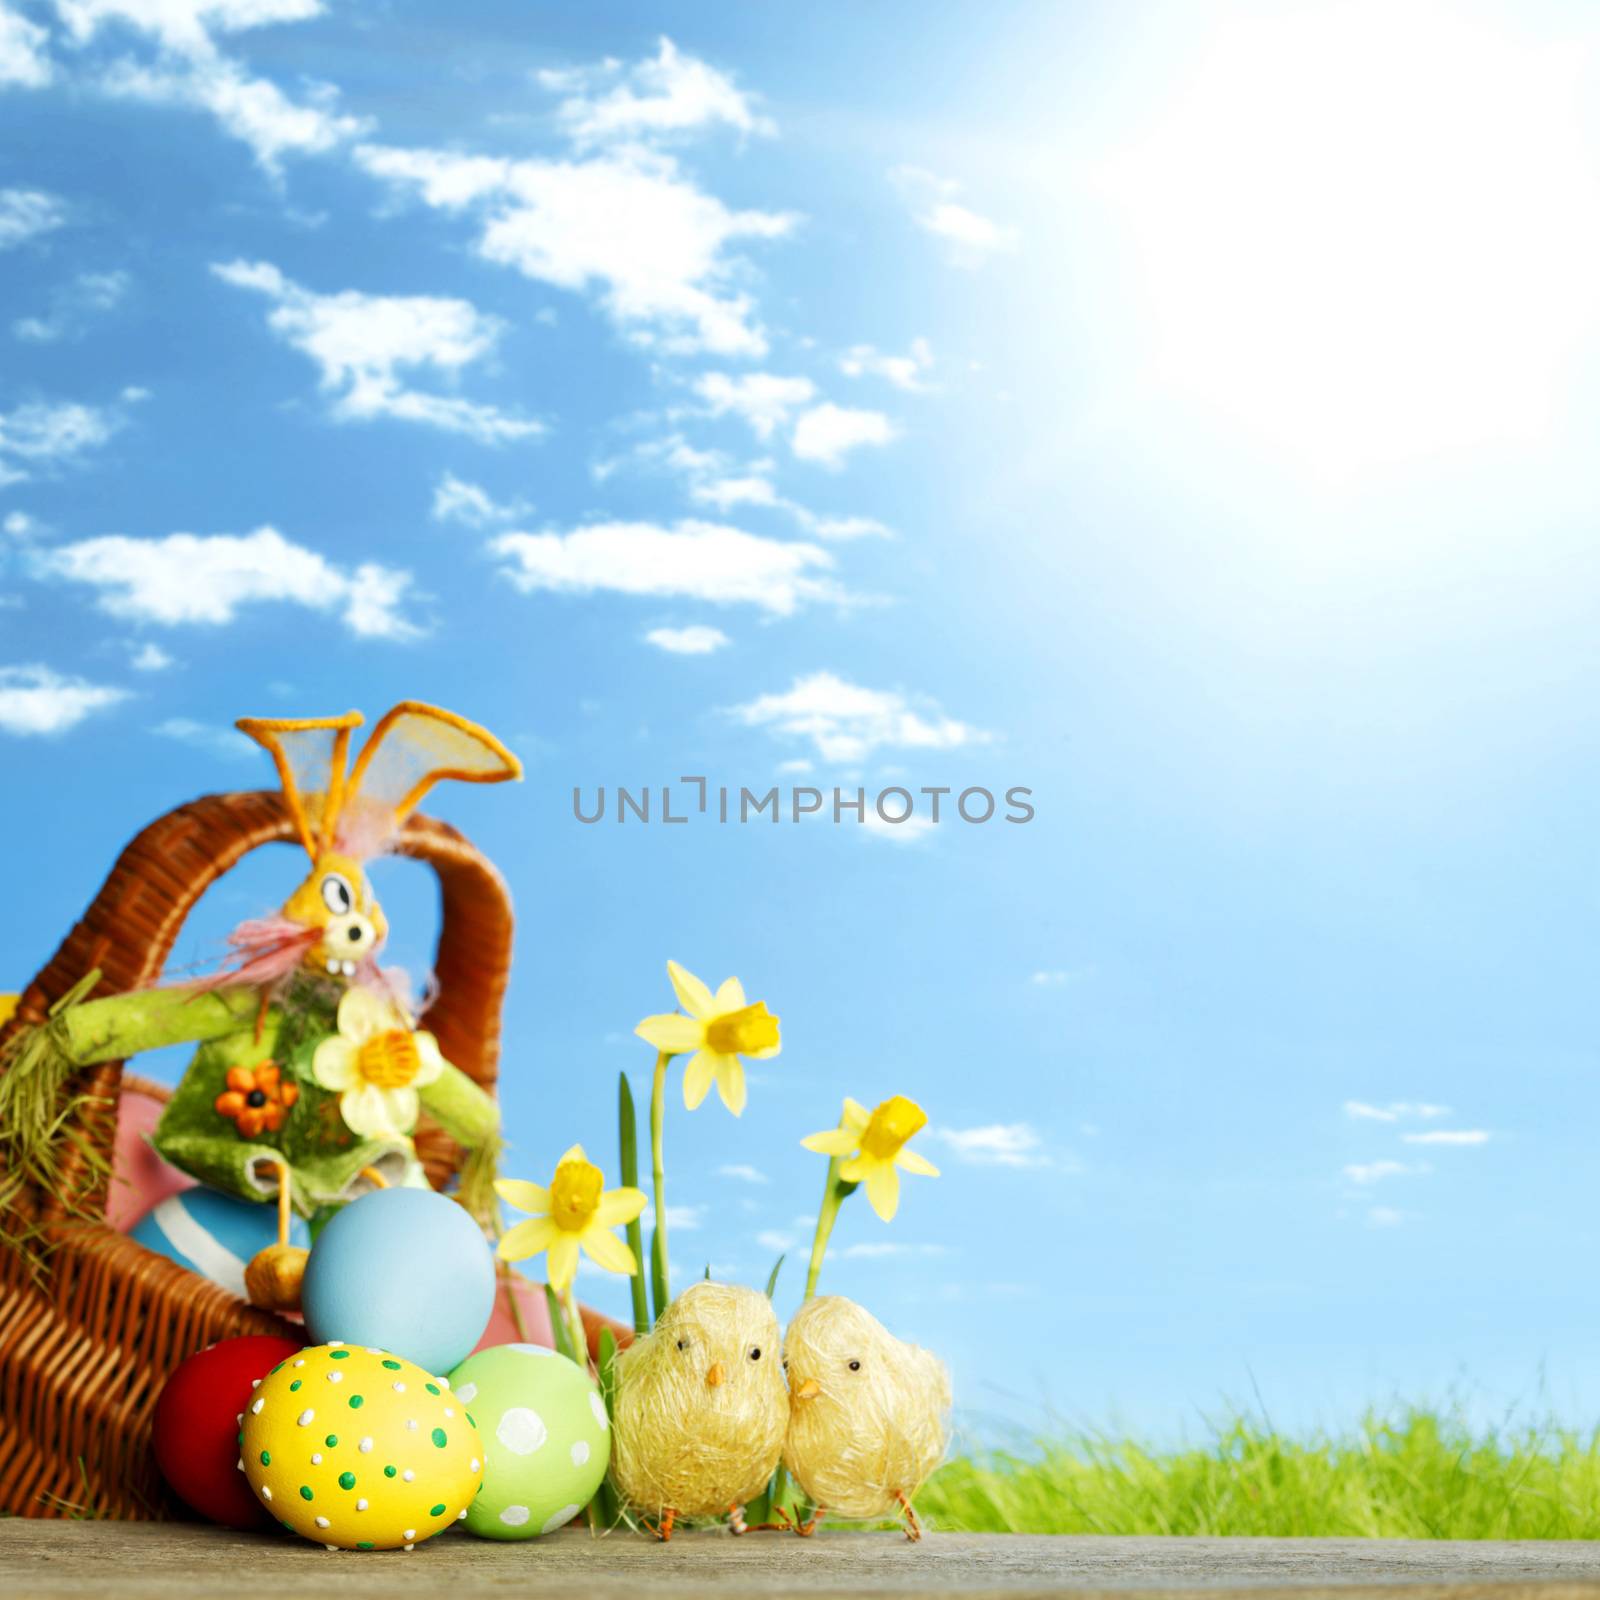 Easter basket with eggs on green meadow with flowers